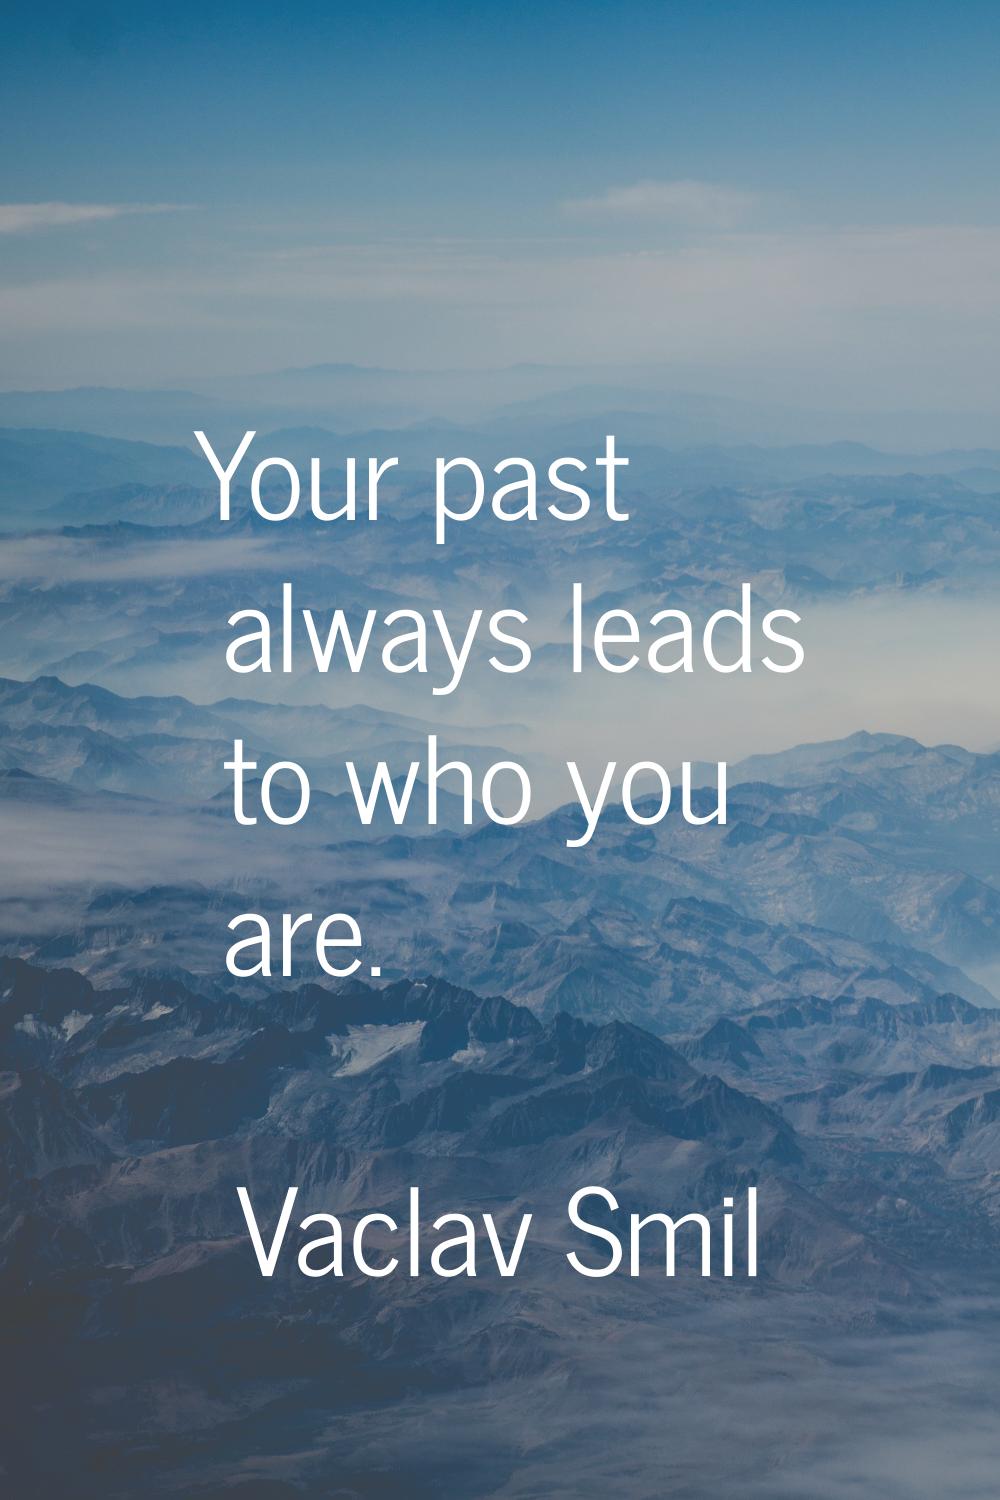 Your past always leads to who you are.